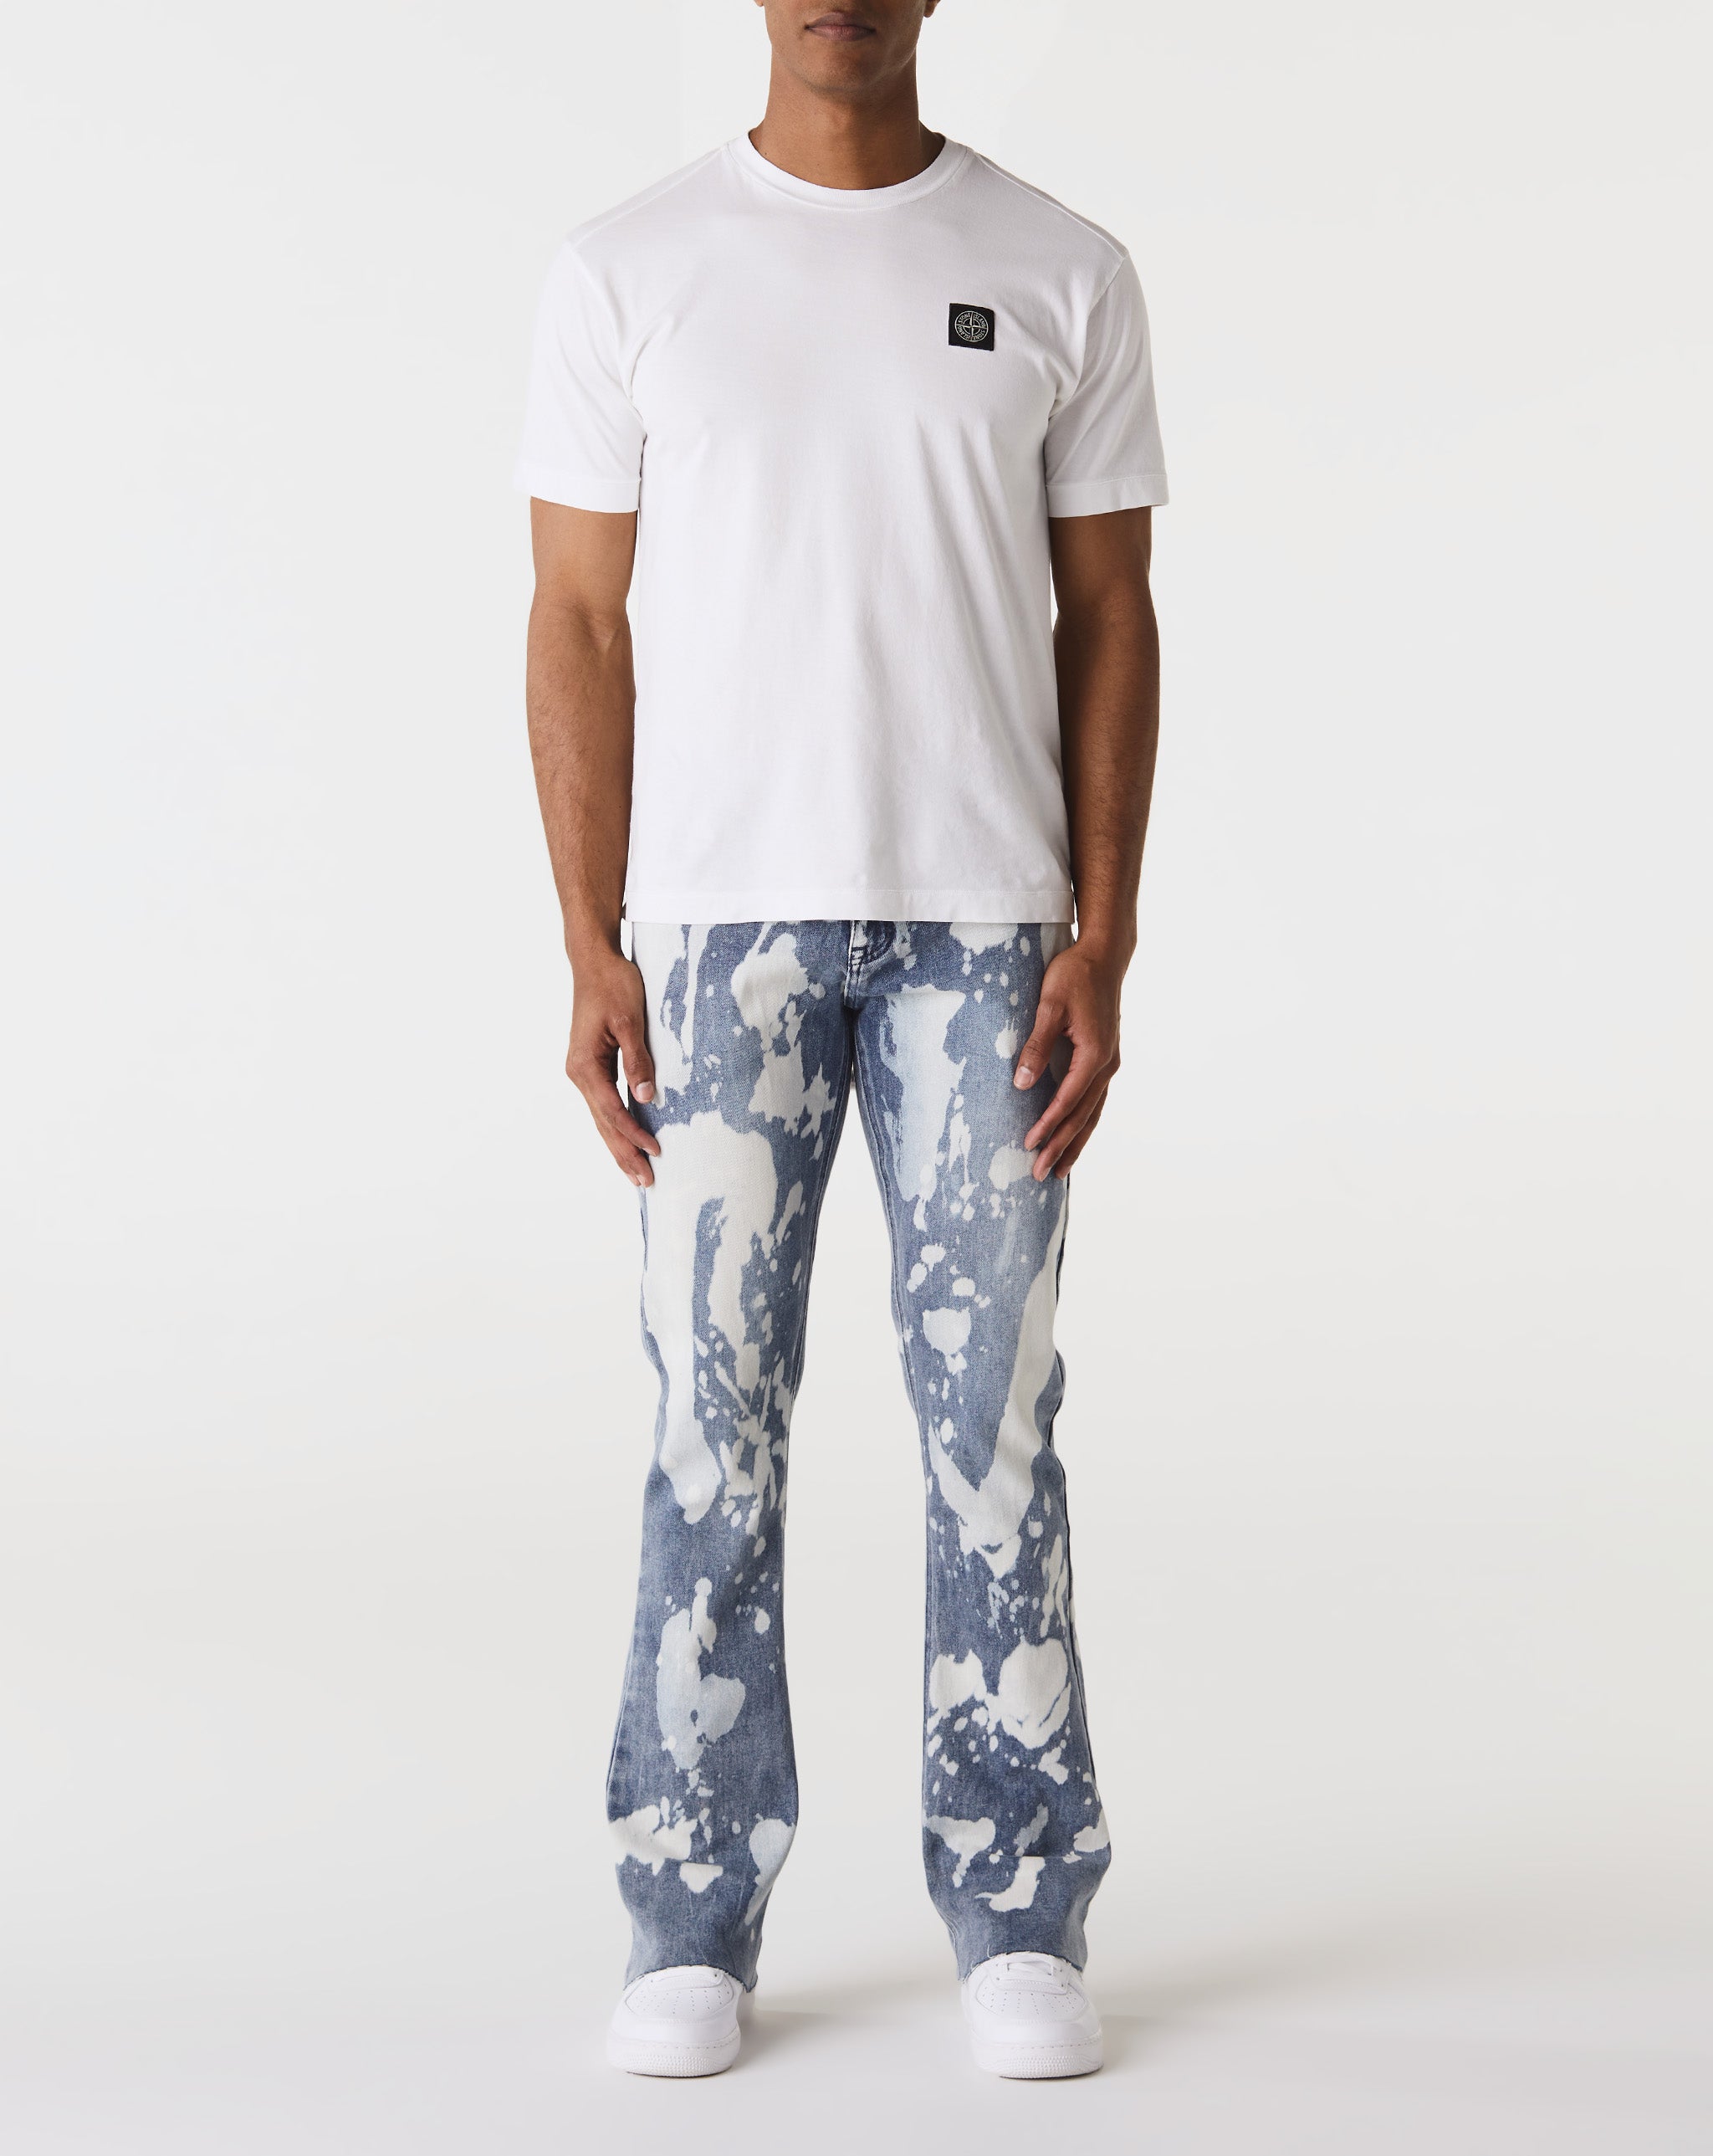 Doctrine Hendrix Flared Jeans - Rule of Next Apparel